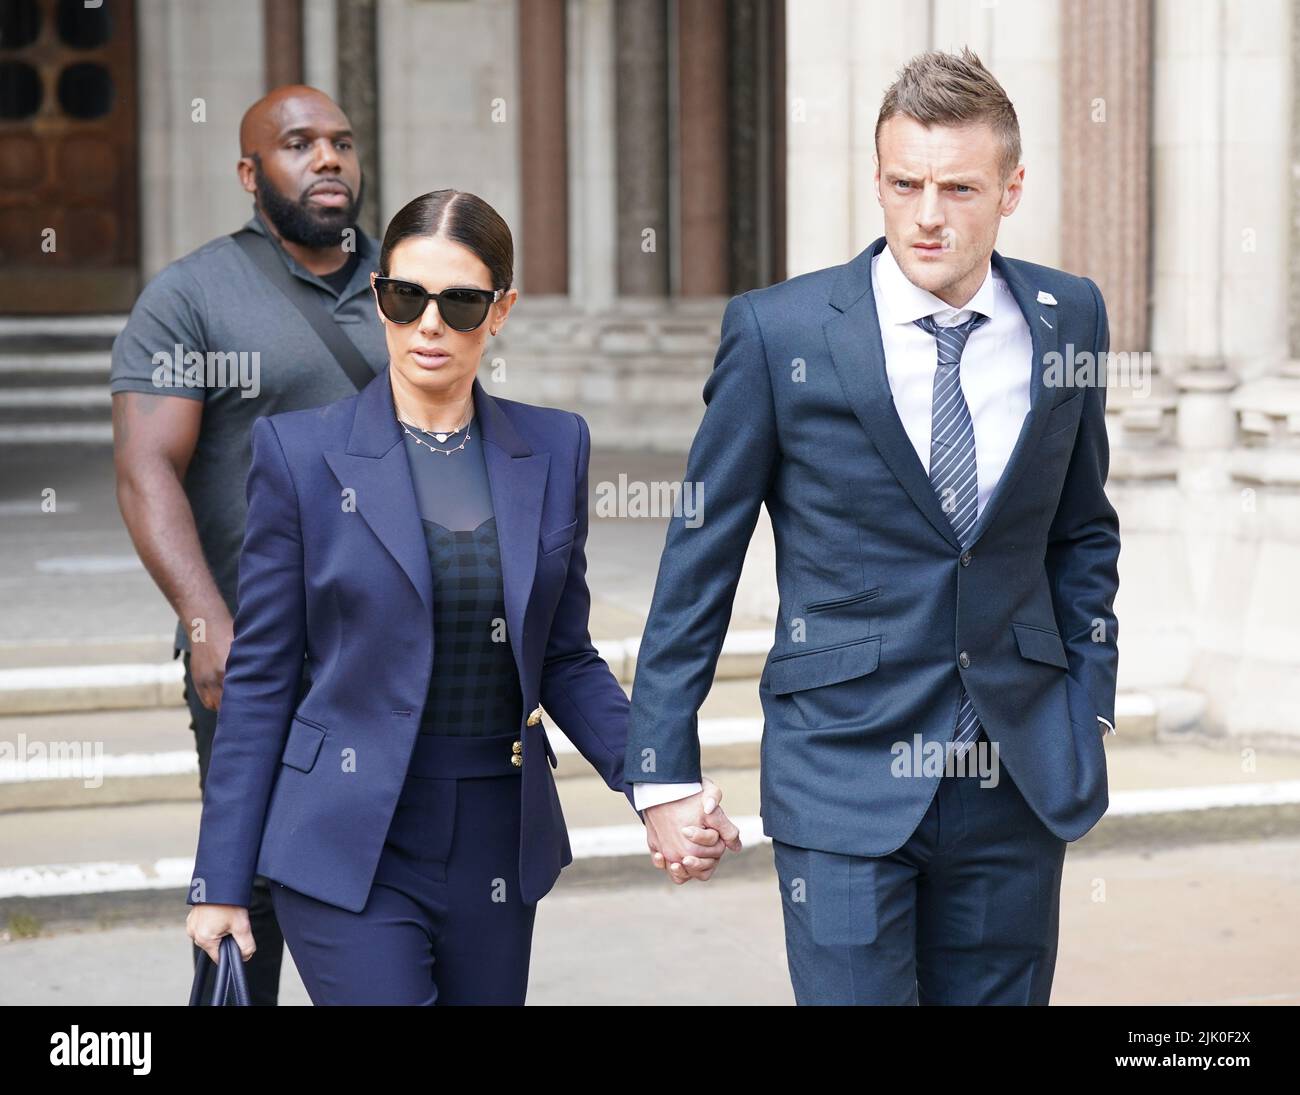 File photo dated 17/5/2022 of Rebekah and Jamie Vardy leaving the Royal Courts Of Justice, London. Rebekah Vardy and Coleen Rooney are due to find out who has won their High Court libel battle in the "Wagatha Christie" case. In a viral social media post in October 2019, Mrs Rooney, 36, said she had carried out a "sting operation" and accused Mrs Vardy, 40, of leaking "false stories" about her private life to the press. Issue date: Friday July 29, 2022. Stock Photo